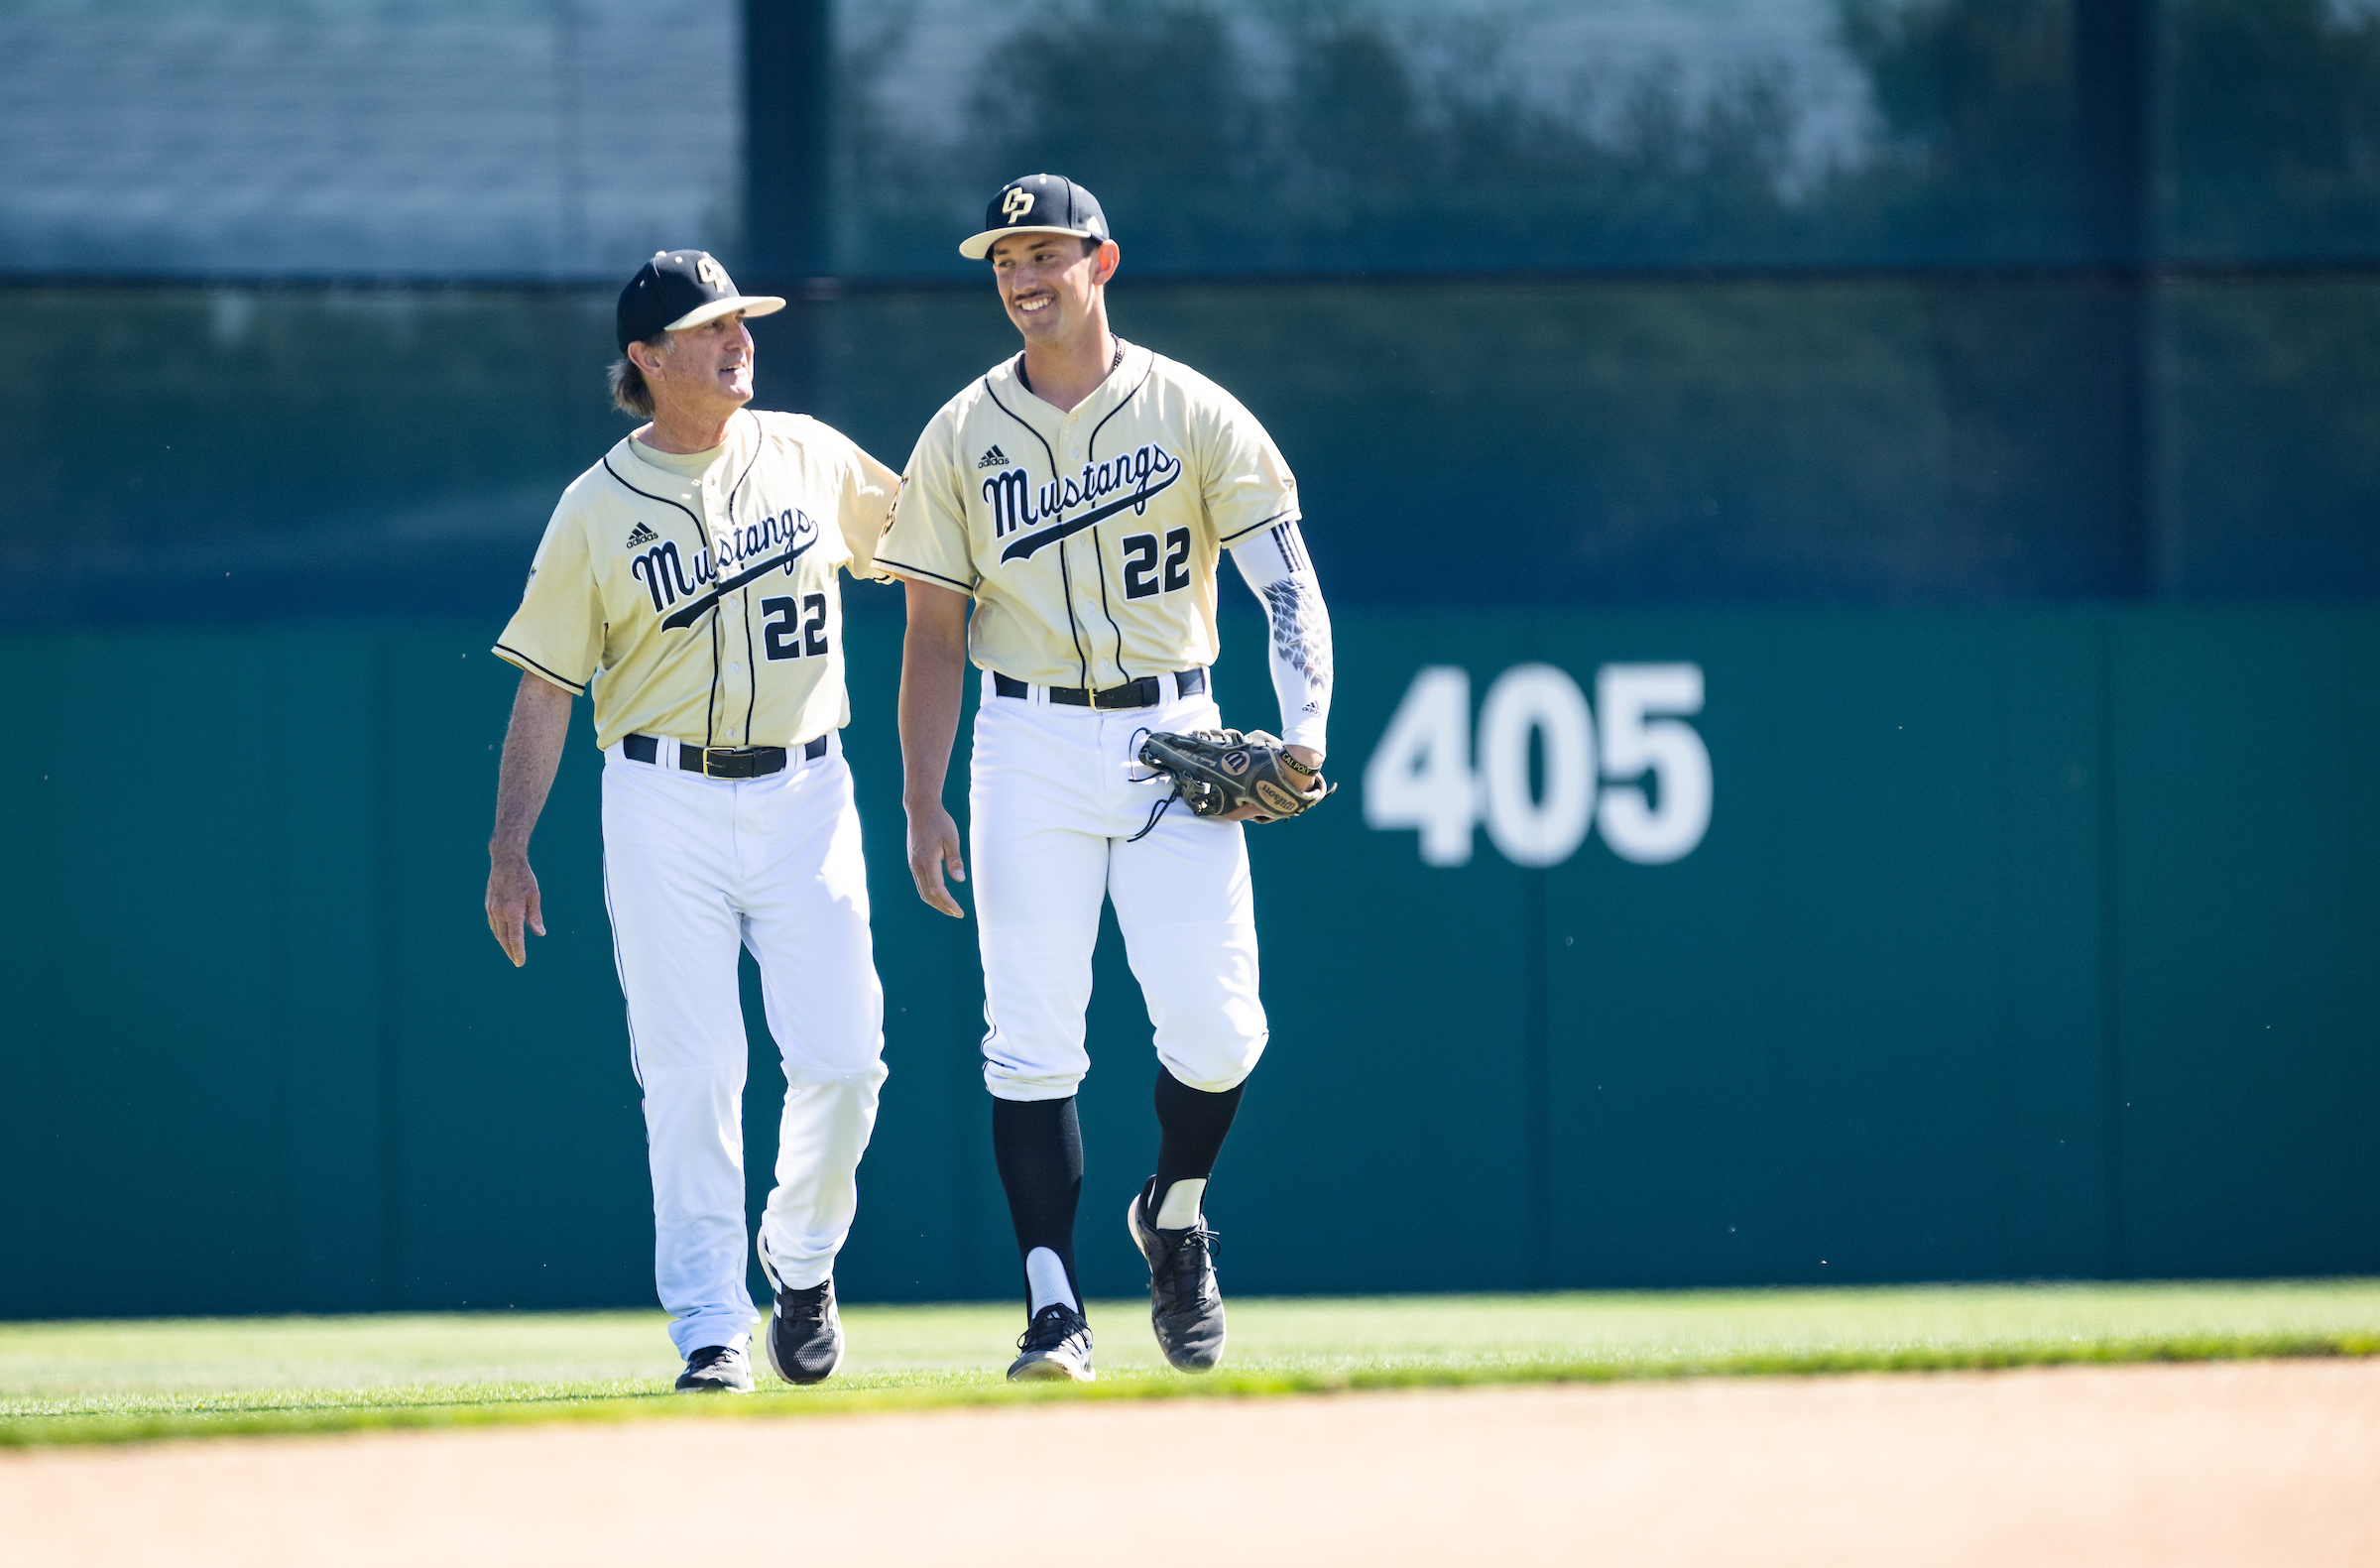 Cal Poly baseball player Brooks Lee and his dad, Larry Lee, wear their uniforms and walk together across the baseball diamond.